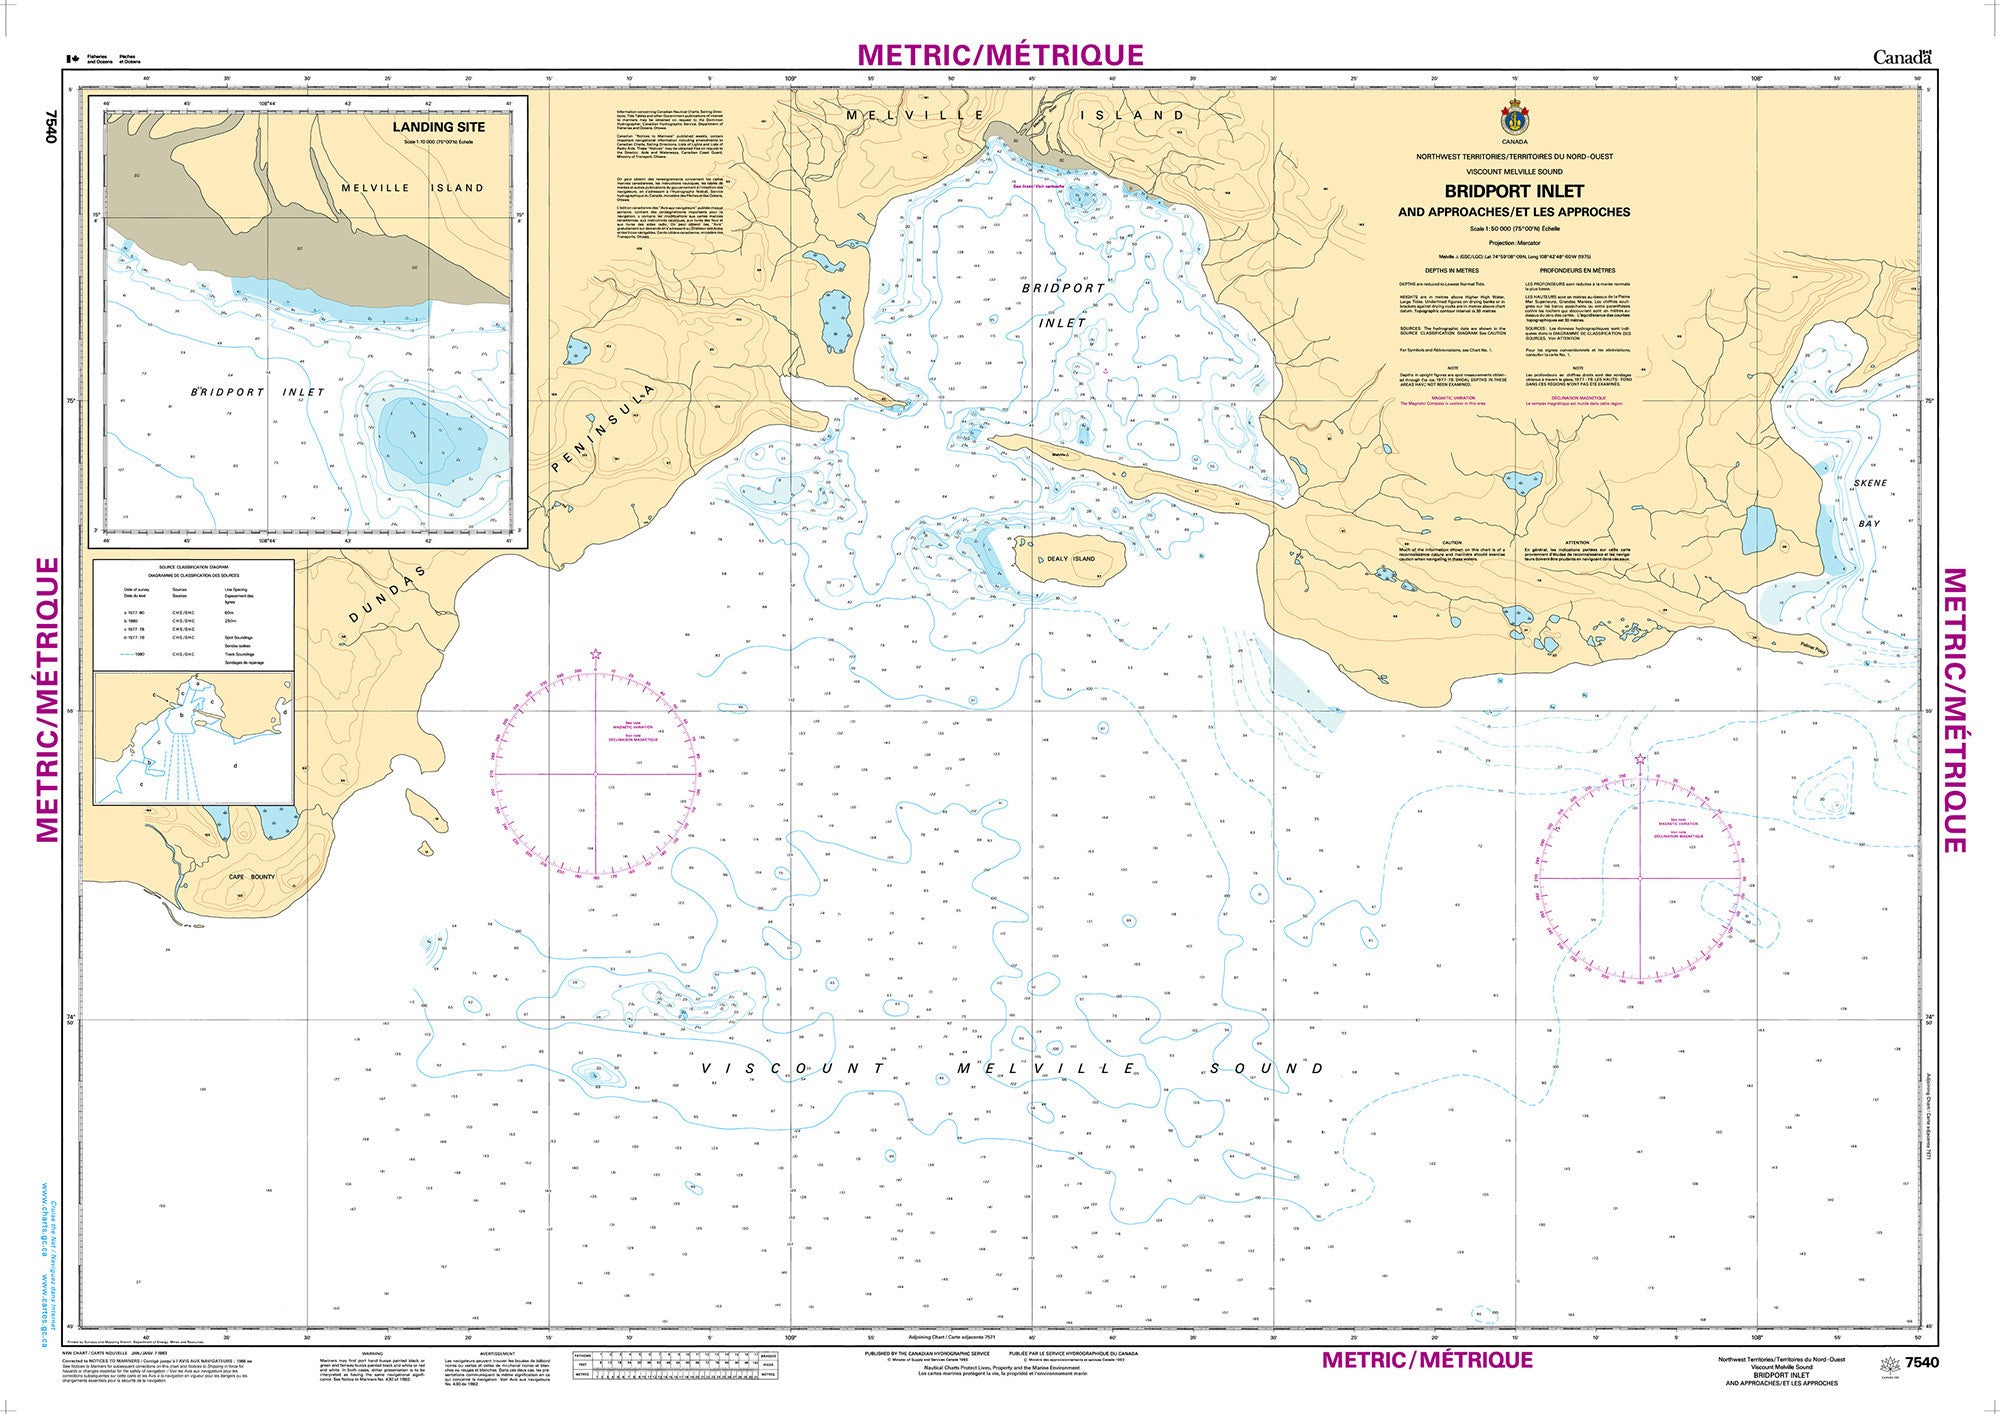 Canadian Hydrographic Service Nautical Chart CHS7540: Bridport Inlet and Approaches/et Les Approches